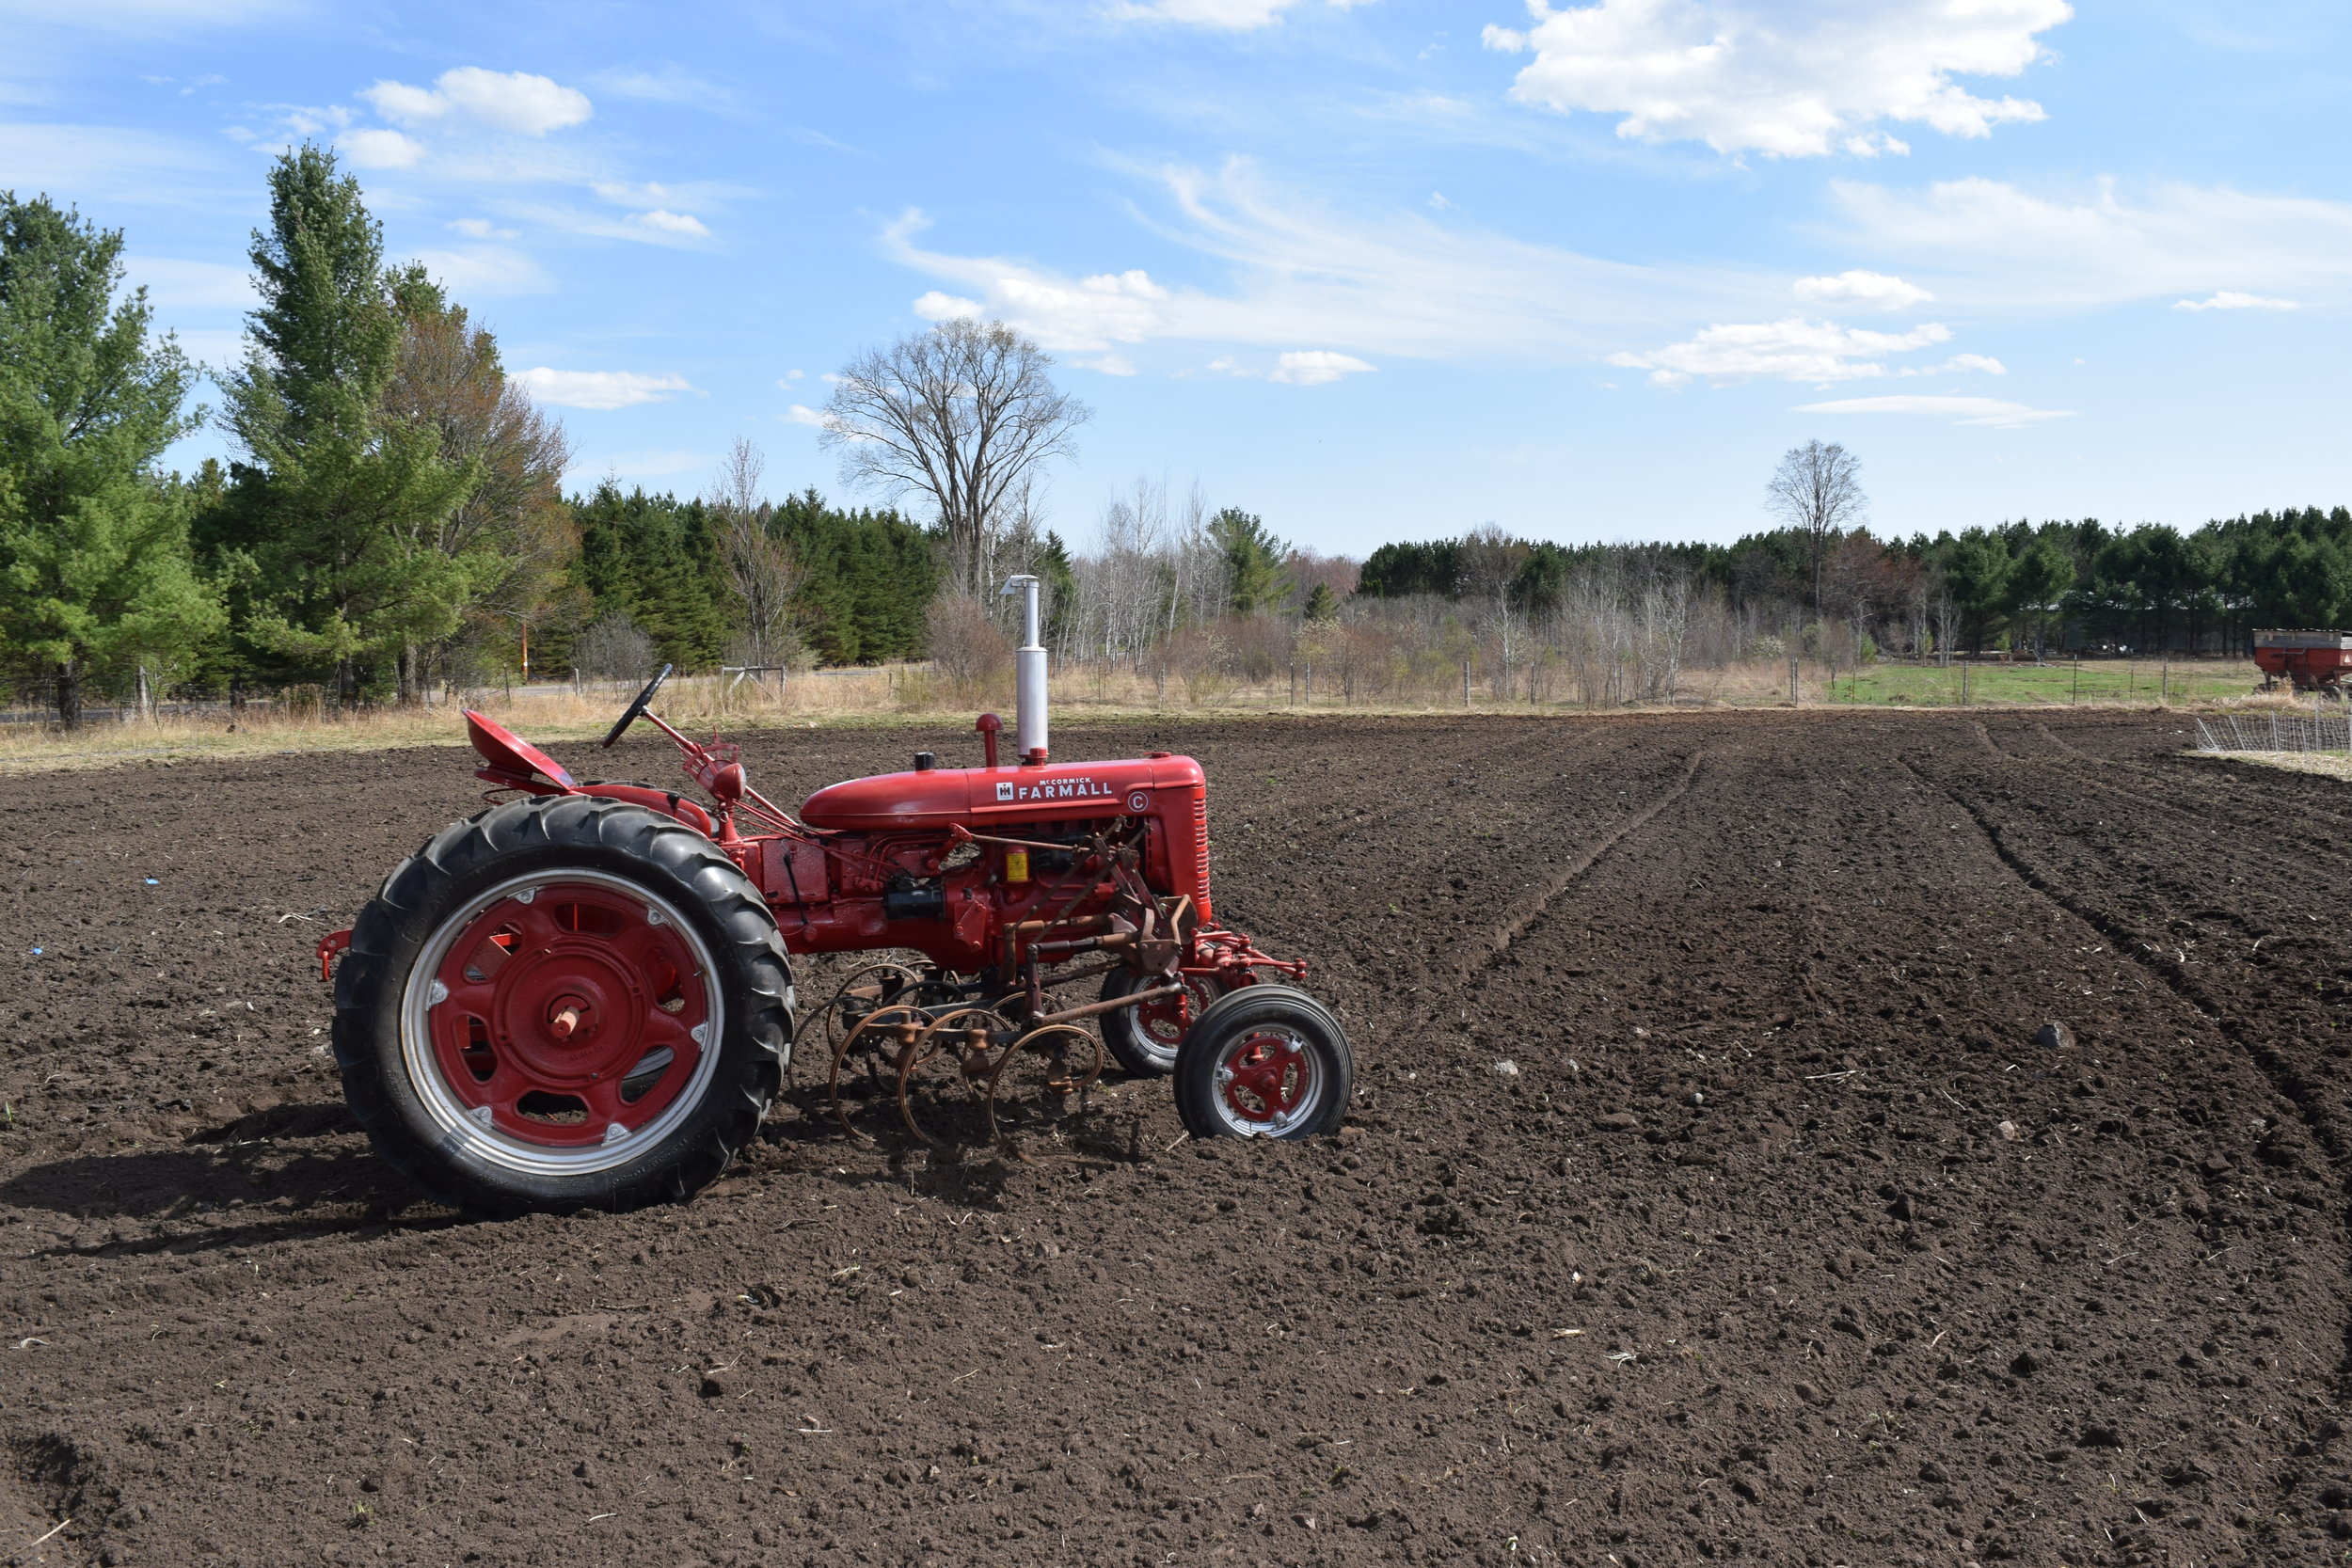 Red tractor in the plowed field.JPG